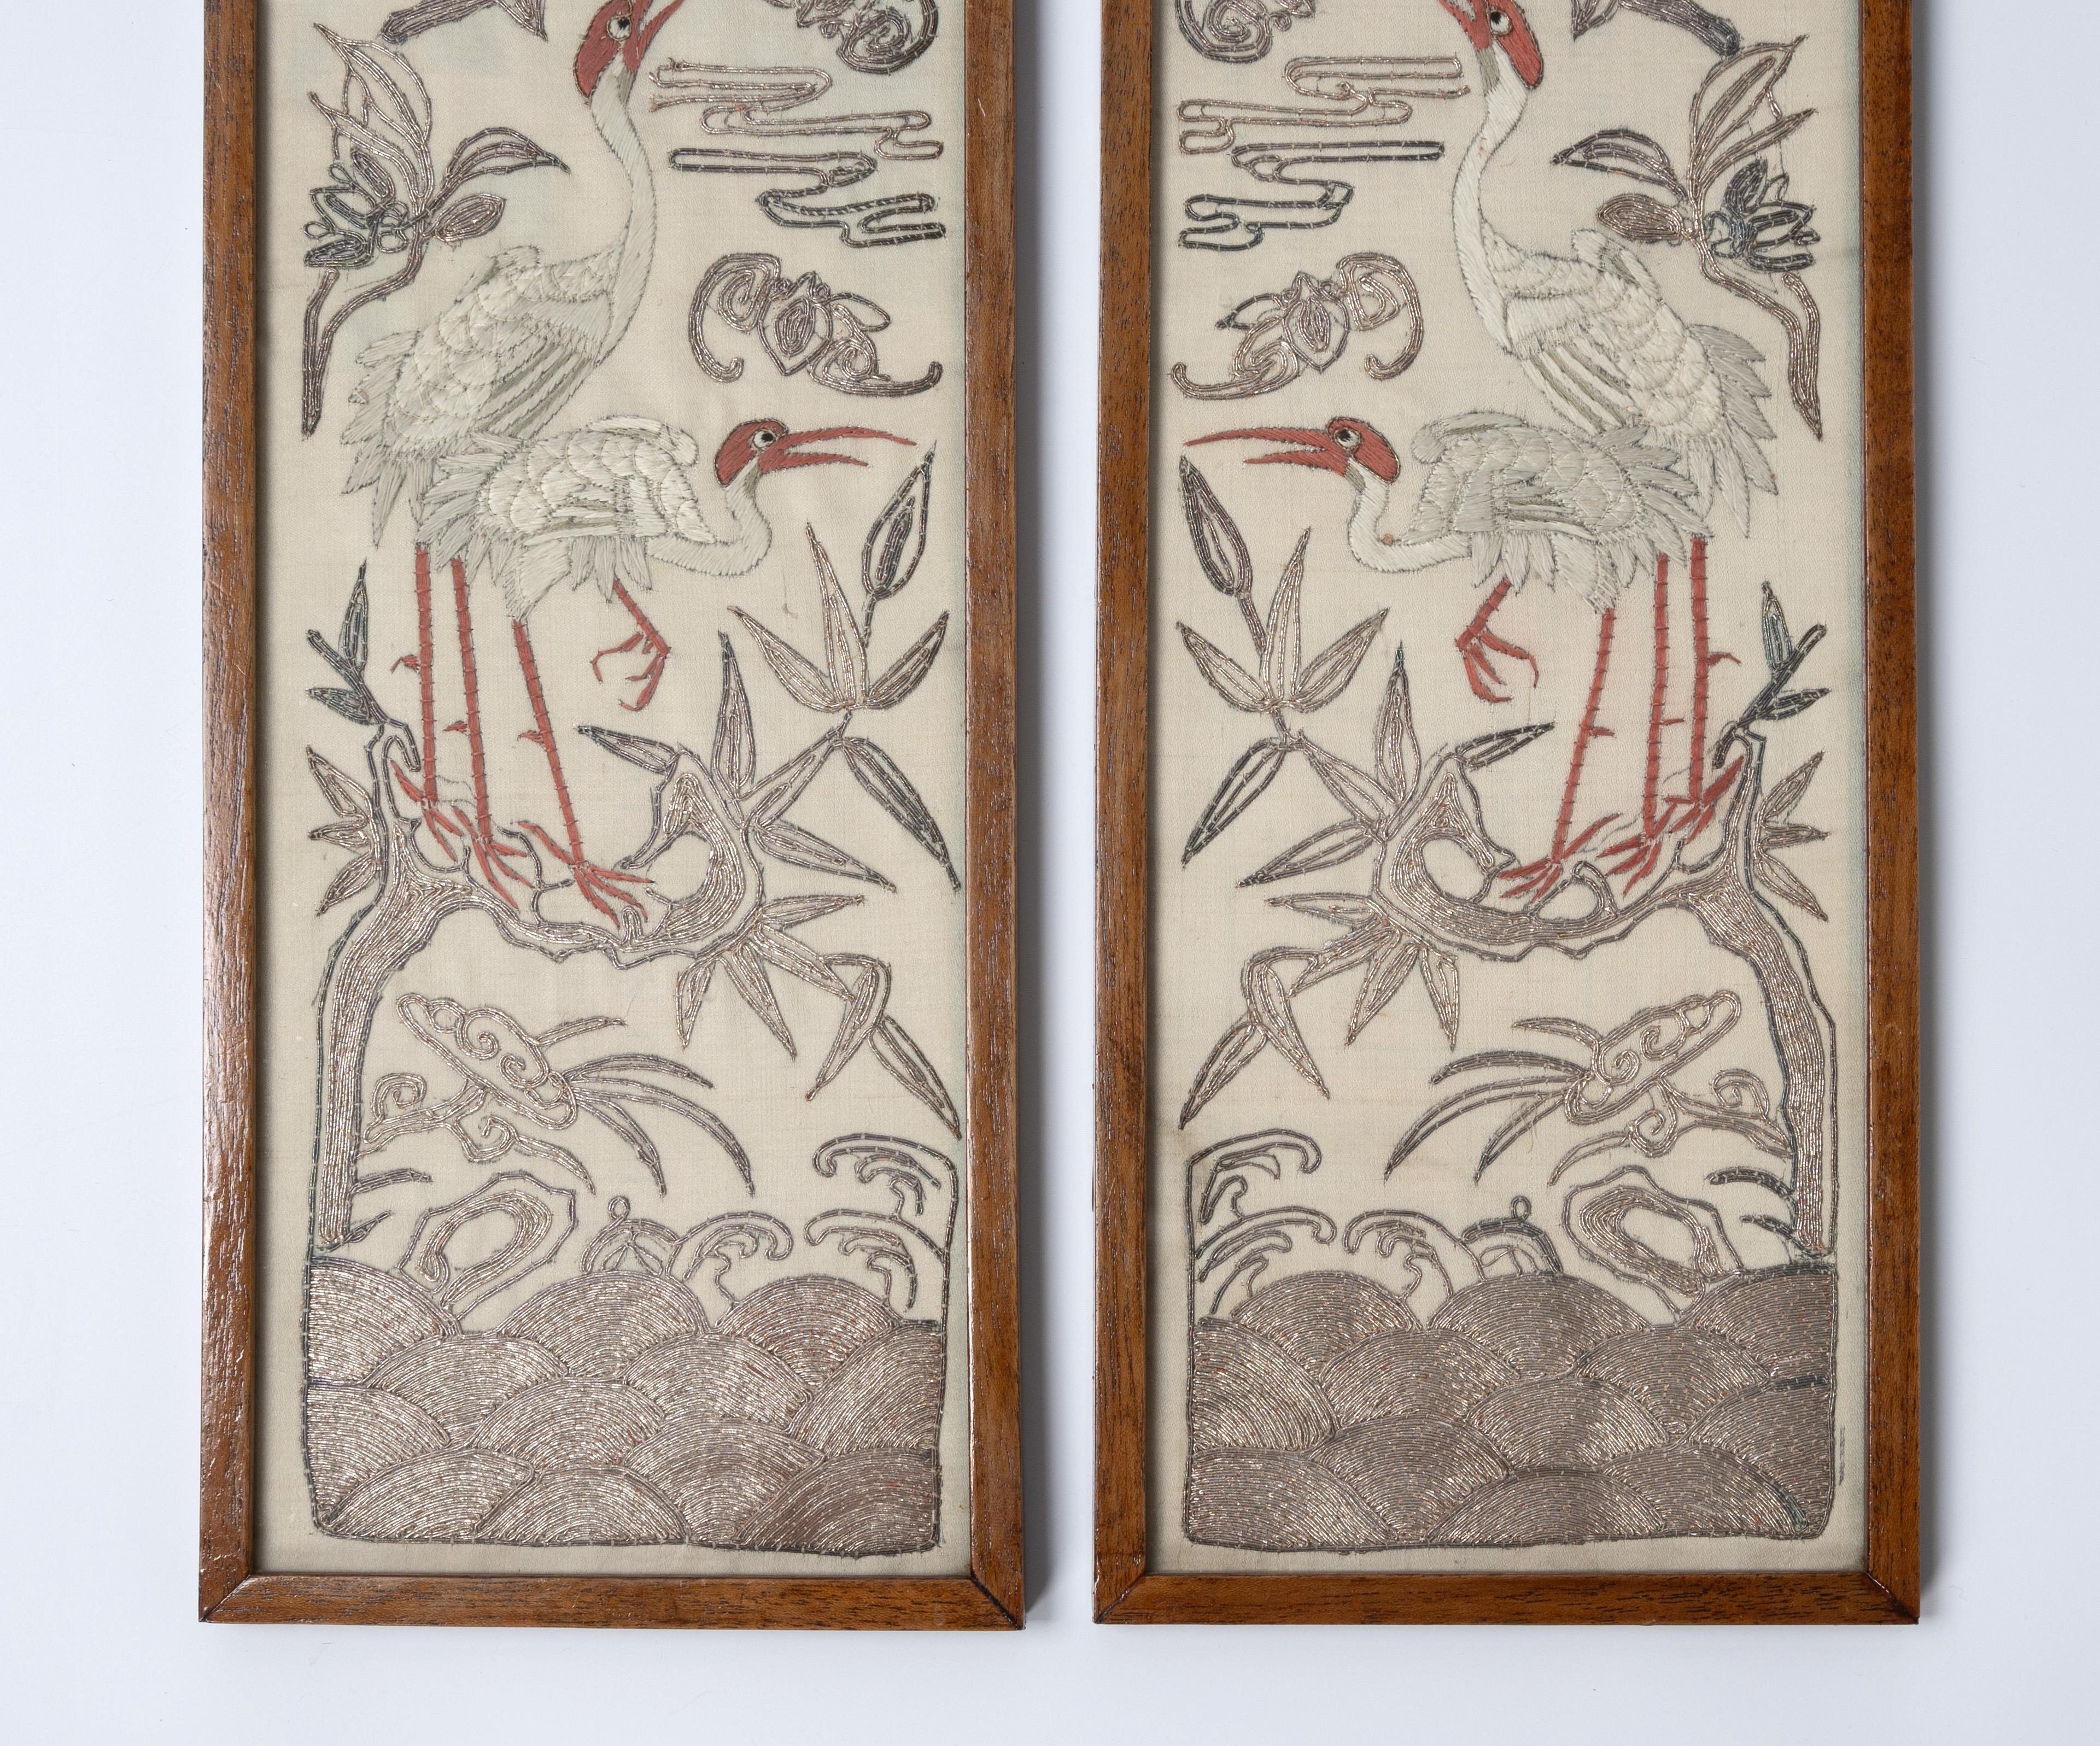 A PAIR OF CHINESE SILK EMBROIDERED PANELS 19th Century, Qing Dynasty
Each worked to depict a pair of cranes perched atop a leafy branch over crashing waves, mounted in glazed frames, 40.5 x 14cm (2)
Very good condition commensurate of age.